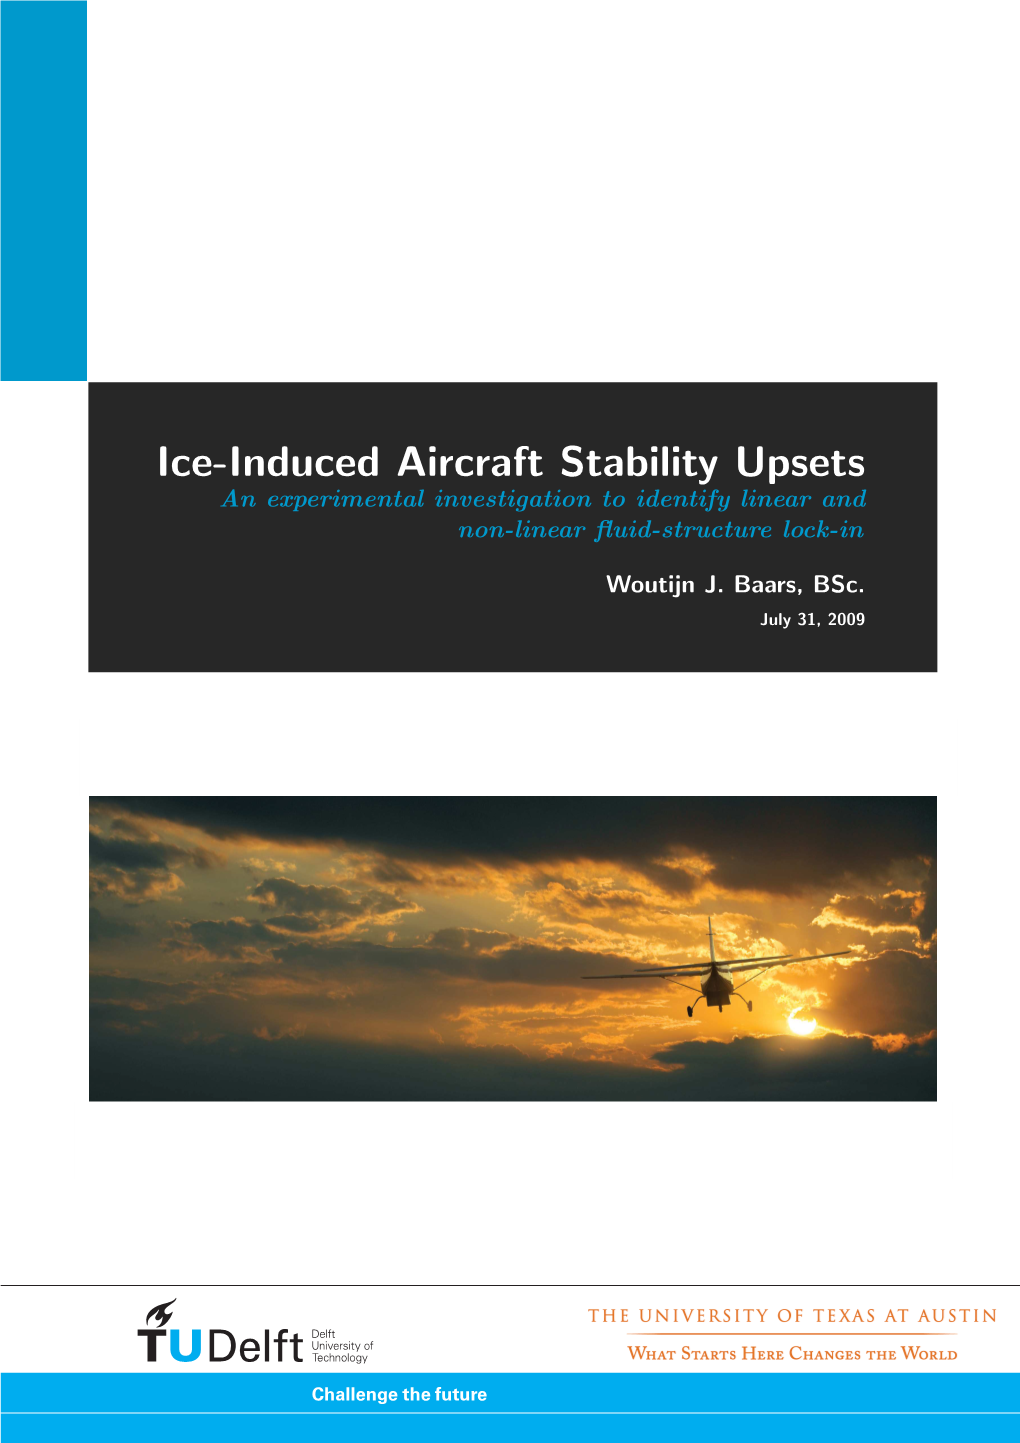 Masters Thesis: Ice-Induced Aircraft Stability Upsets